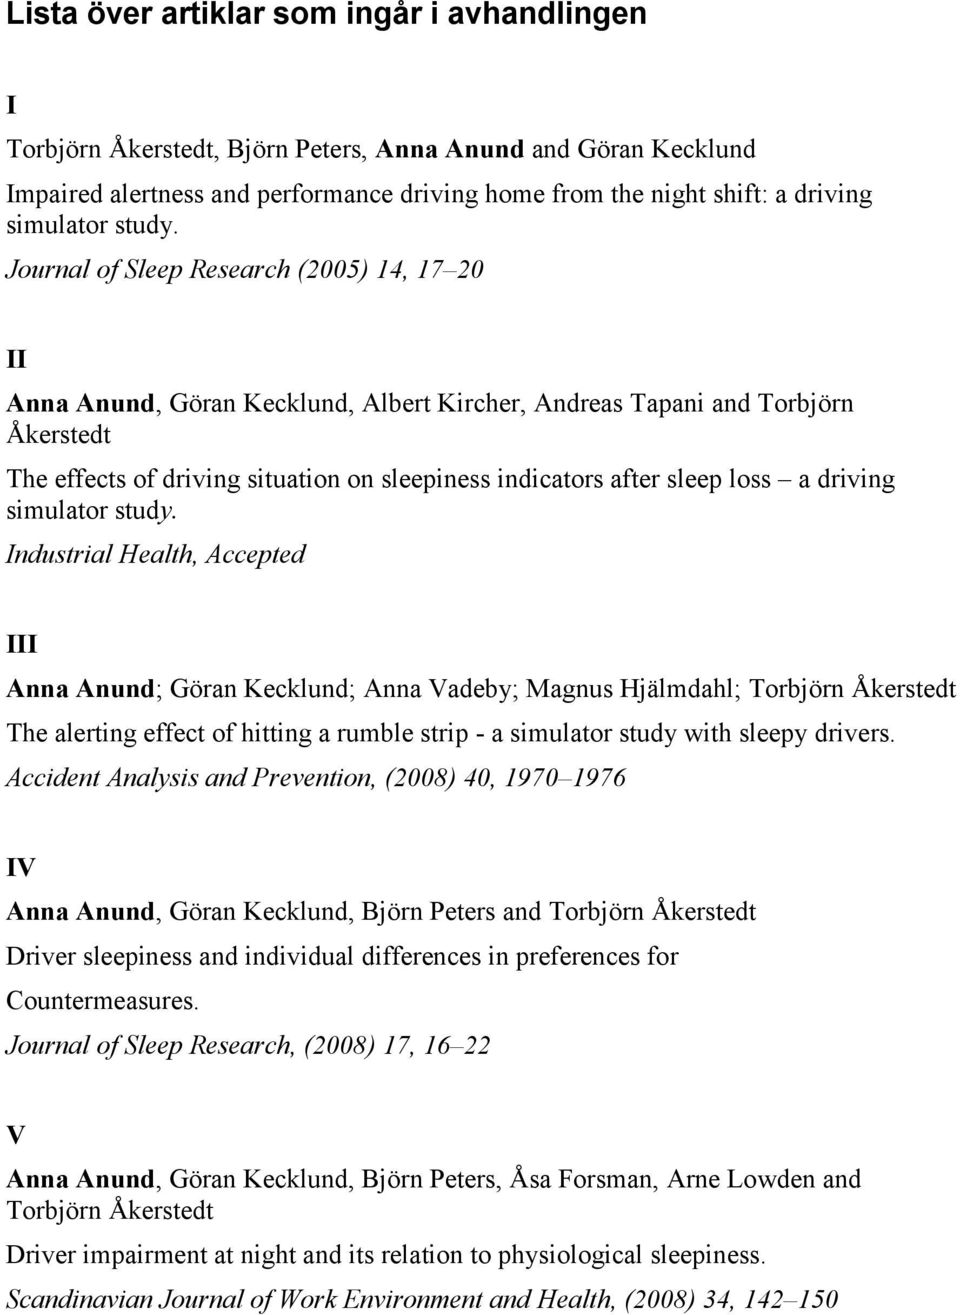 Journal of Sleep Research (2005) 14, 17 20 II Anna Anund, Göran Kecklund, Albert Kircher, Andreas Tapani and Torbjörn Åkerstedt The effects of driving situation on sleepiness indicators after sleep